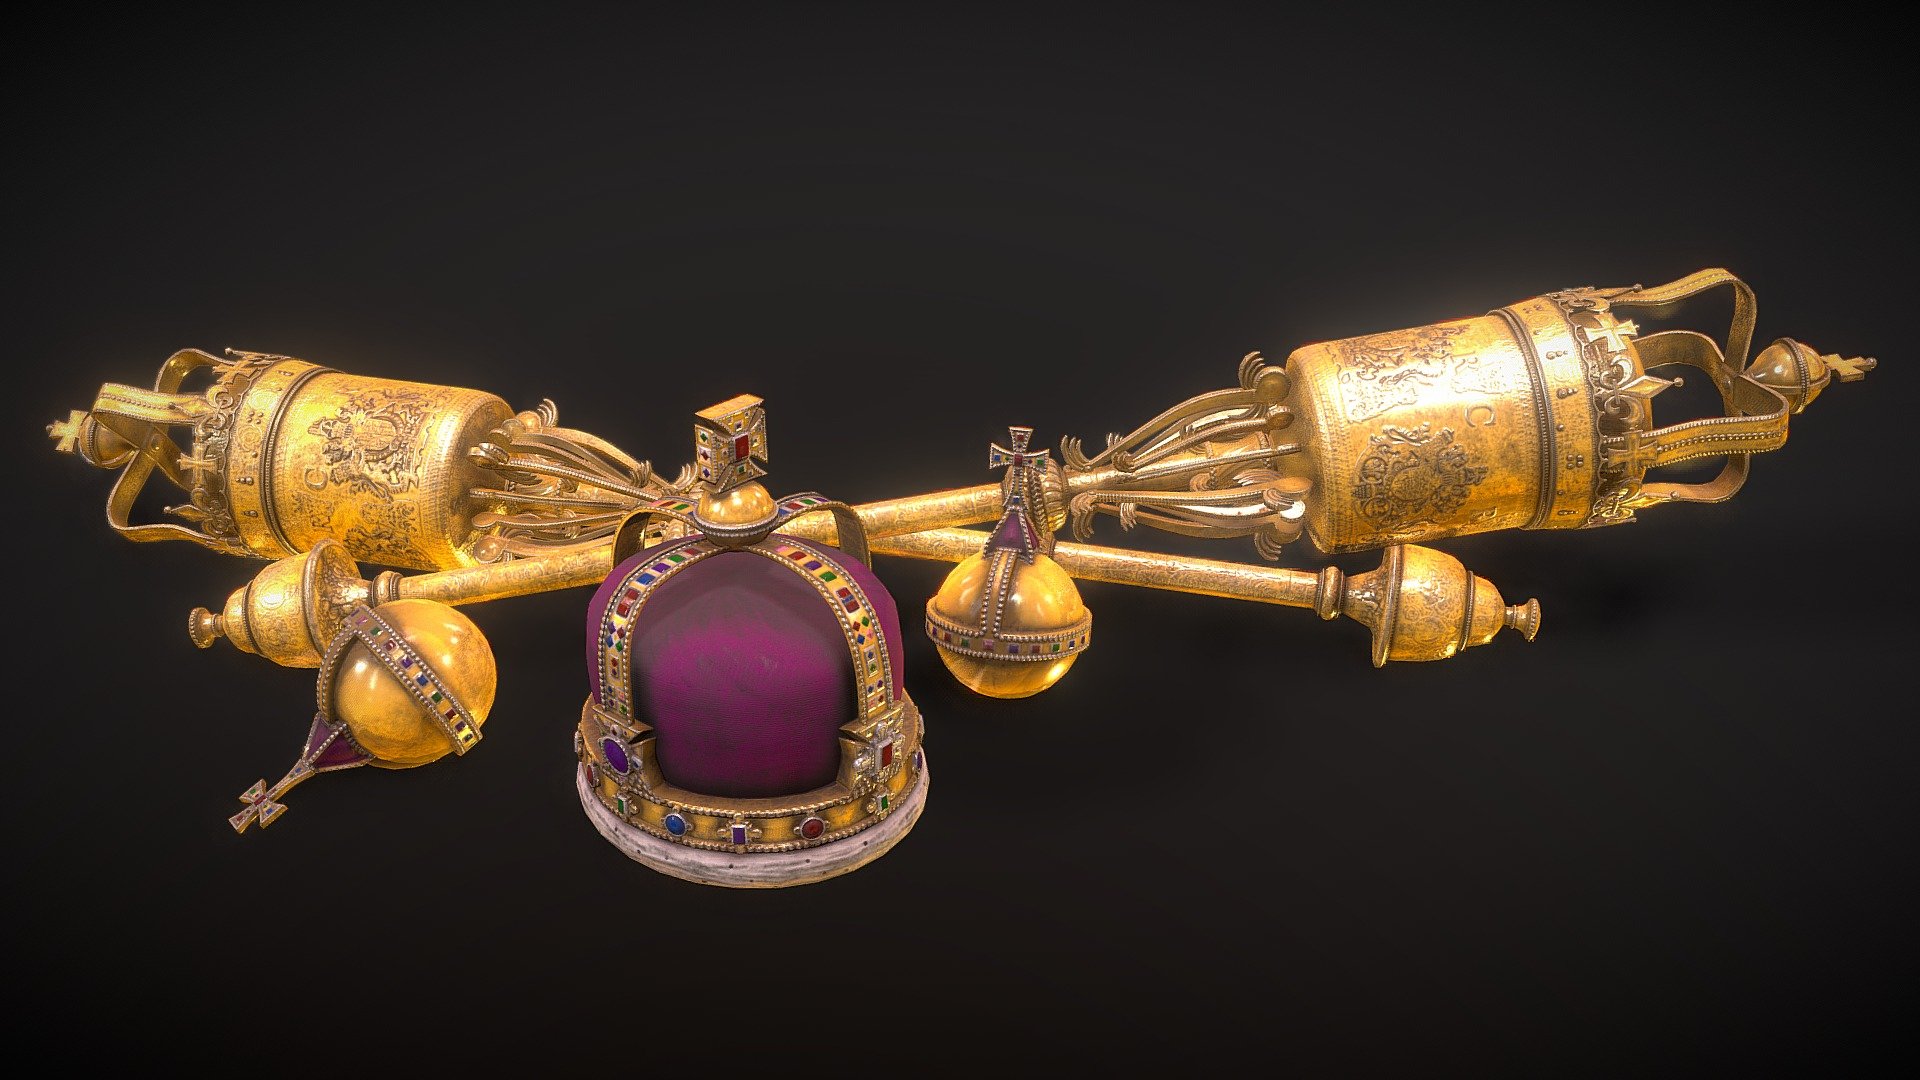 The queens jewels, created for Fallout London, a mod set in London, built in Bethesda’s Fallout 4.

Featuring the sovereign's orb, queens coronation crown and Charles II ceremonial mace. All wearable, throwable, misc items and weapons for fallout 4 3d model